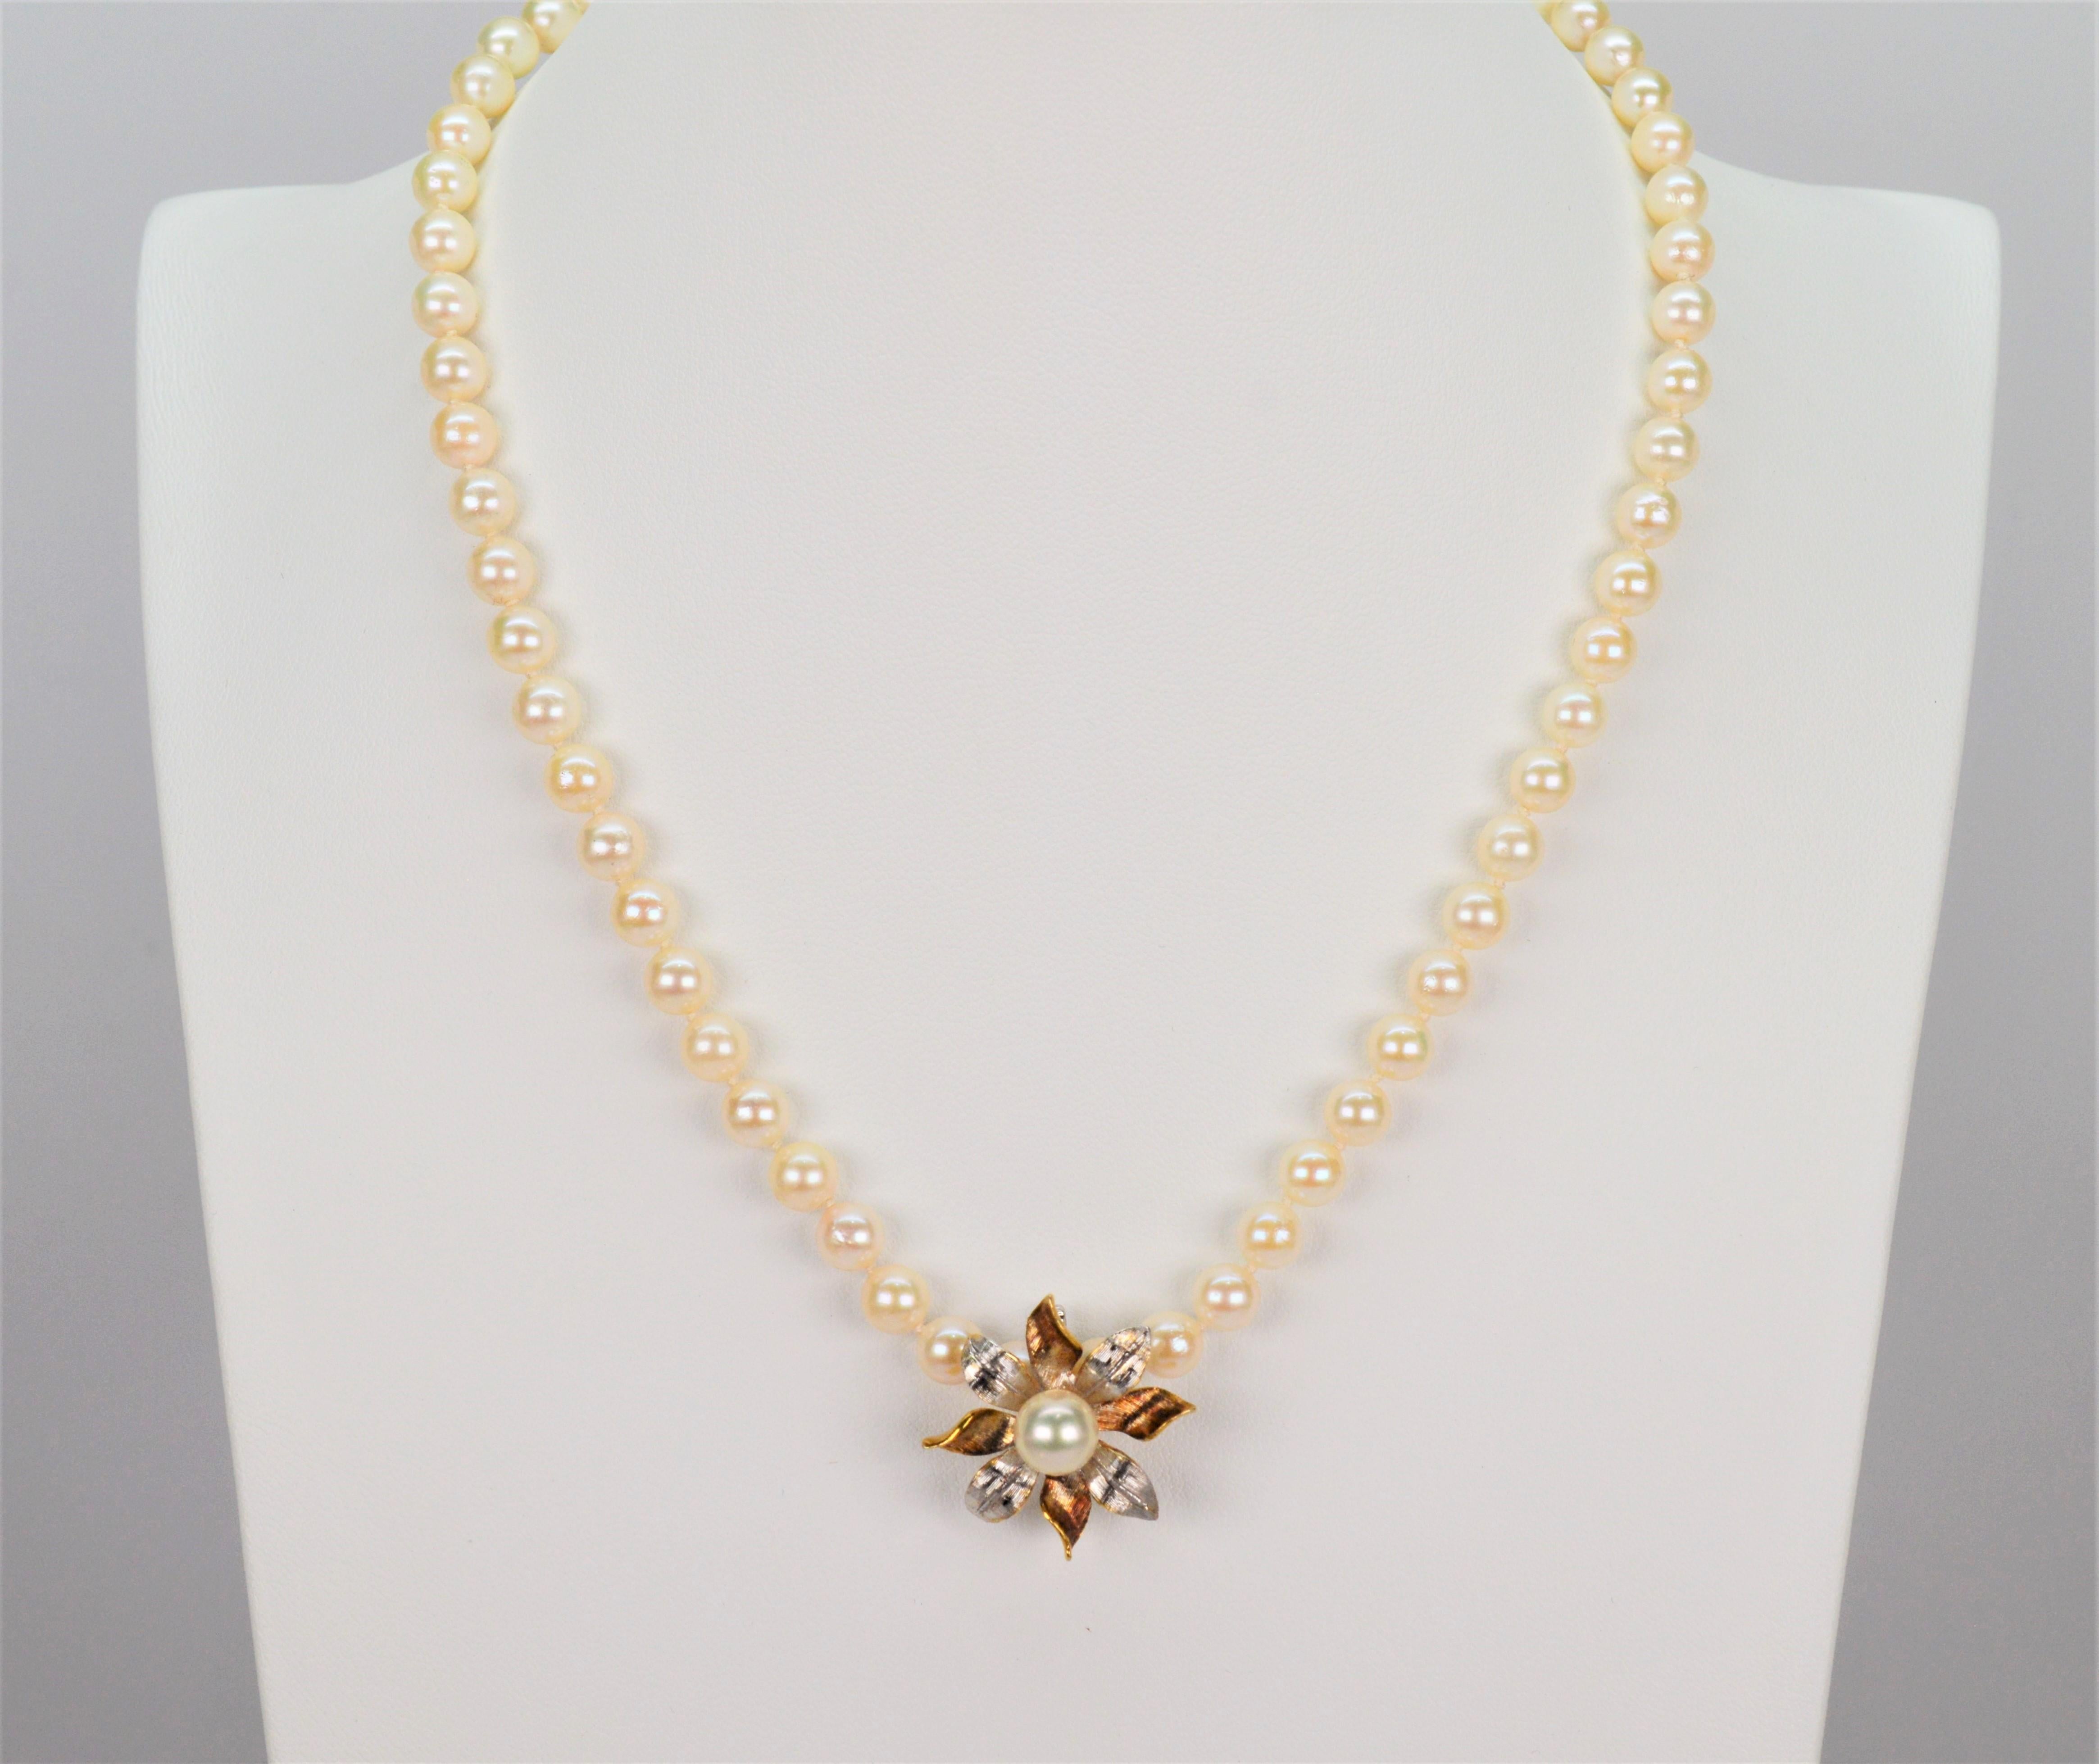 Elevate from traditional to terrific by adding this bright floral burst enhancer in 14 karat white and yellow gold to this necklace. Includes a new 16 inch pearl necklace of round AA 5mm round Akoya Pearls that can be worn independently as a classic